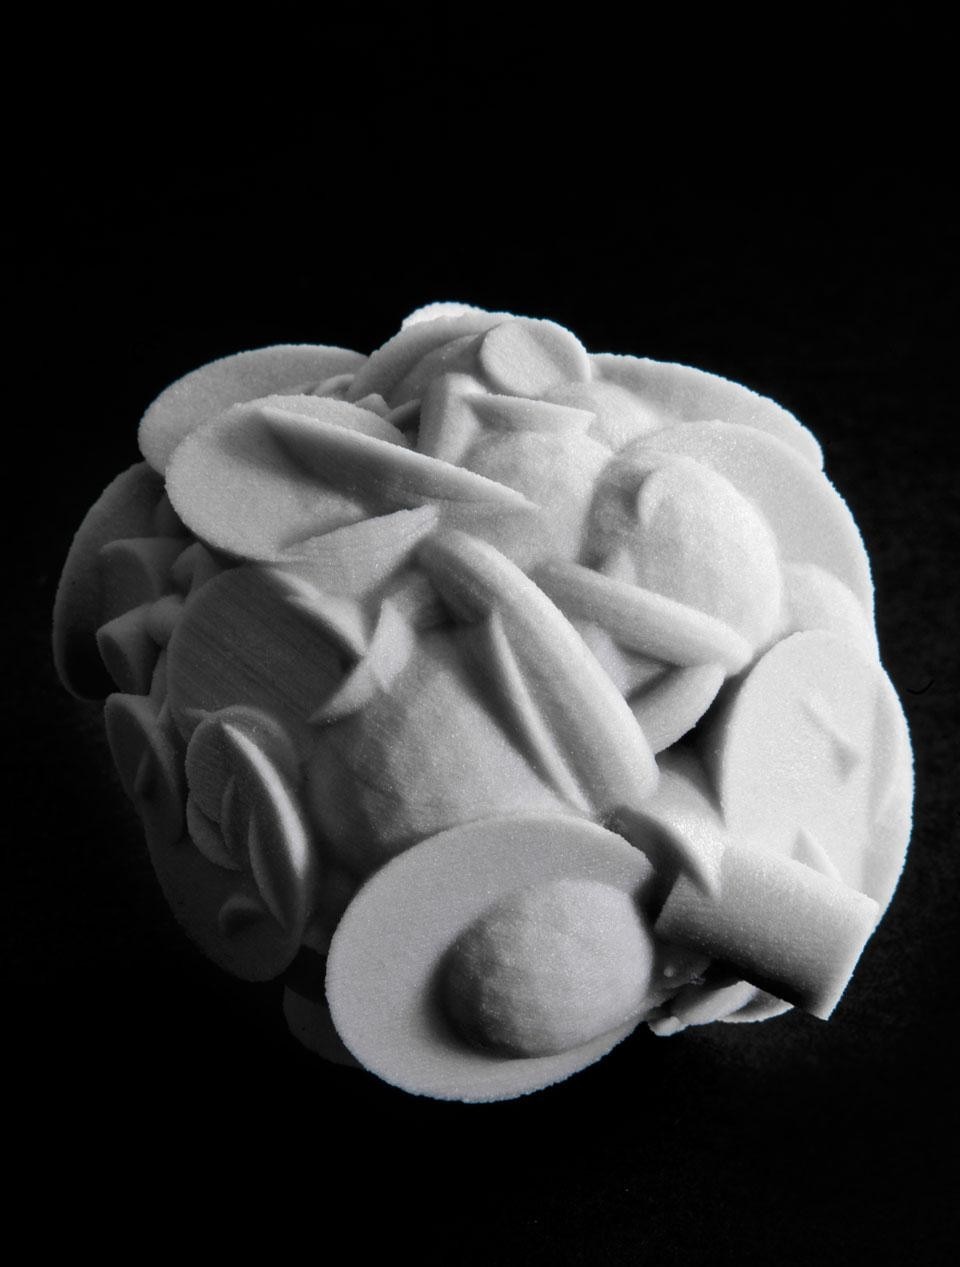 Bruce Gilchrist and Jo
Joelson (London Fieldworks)
involved the German artist
Gustav Metzger in a creative
experiment. Having asked him
to think about nothing, they extracted
data from his encephalogram
and used it to carve a block of
stone with a robot. The resulting
work, <em>Thinking About Nothing</em>, is
reproduced on the cover of Doms 965 and is
also the subject of the exhibition
“Null Object: Gustav Metzger
thinks about nothing”, which was on show
at the Work Gallery in London through 9 February 2013 (image
courtesy of London Fieldworks)